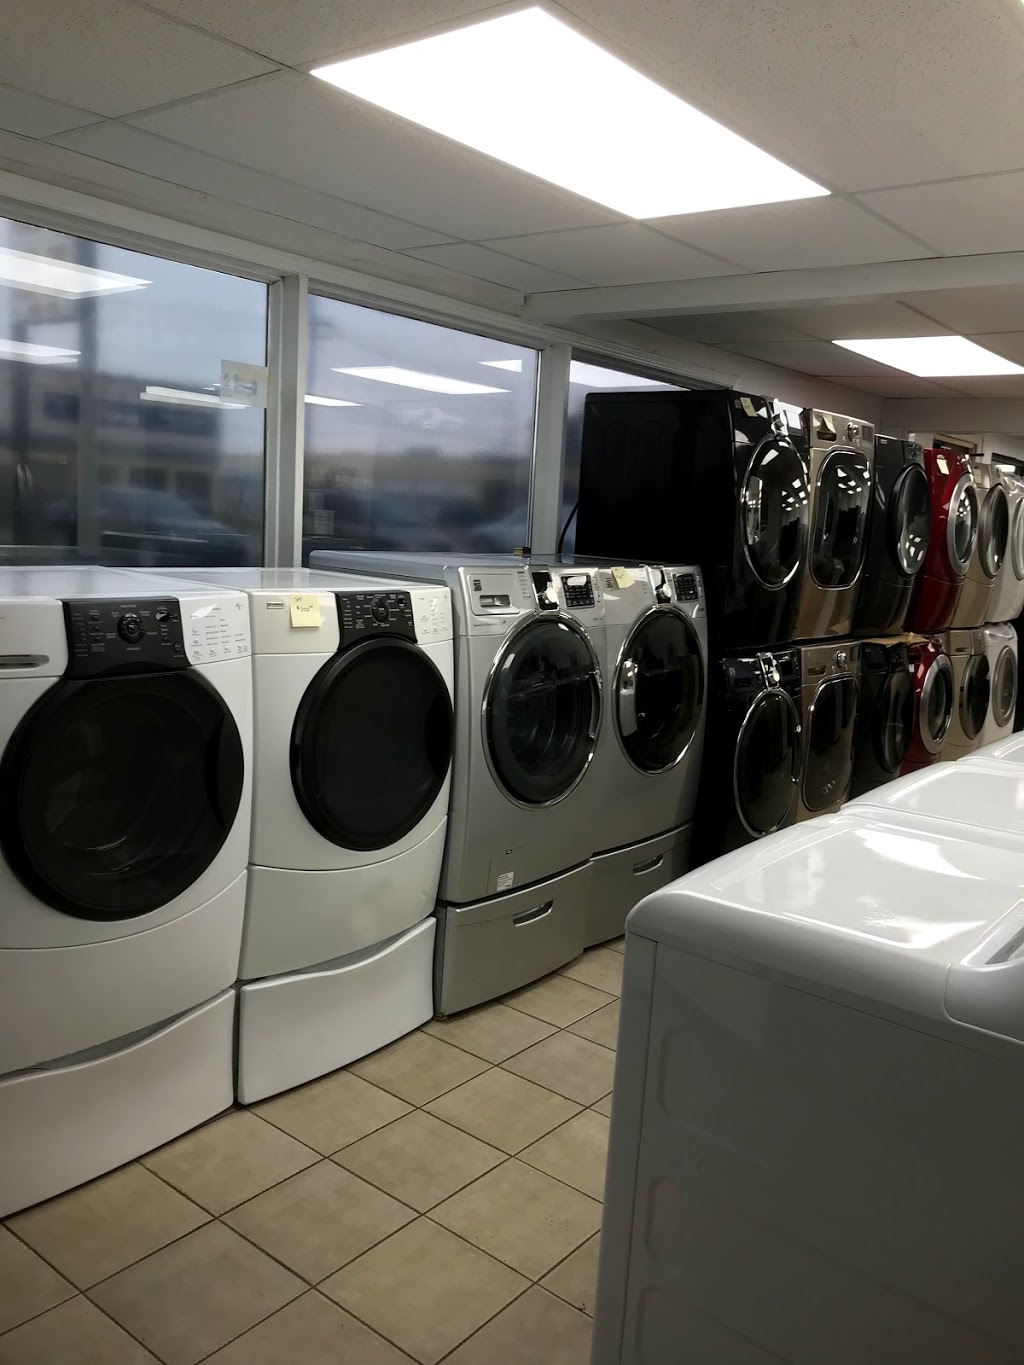 NEW & USED Home Appliance Warehouse | 16665 111 Ave NW, Edmonton, AB T5M 2S4, Canada | Phone: (780) 455-3186